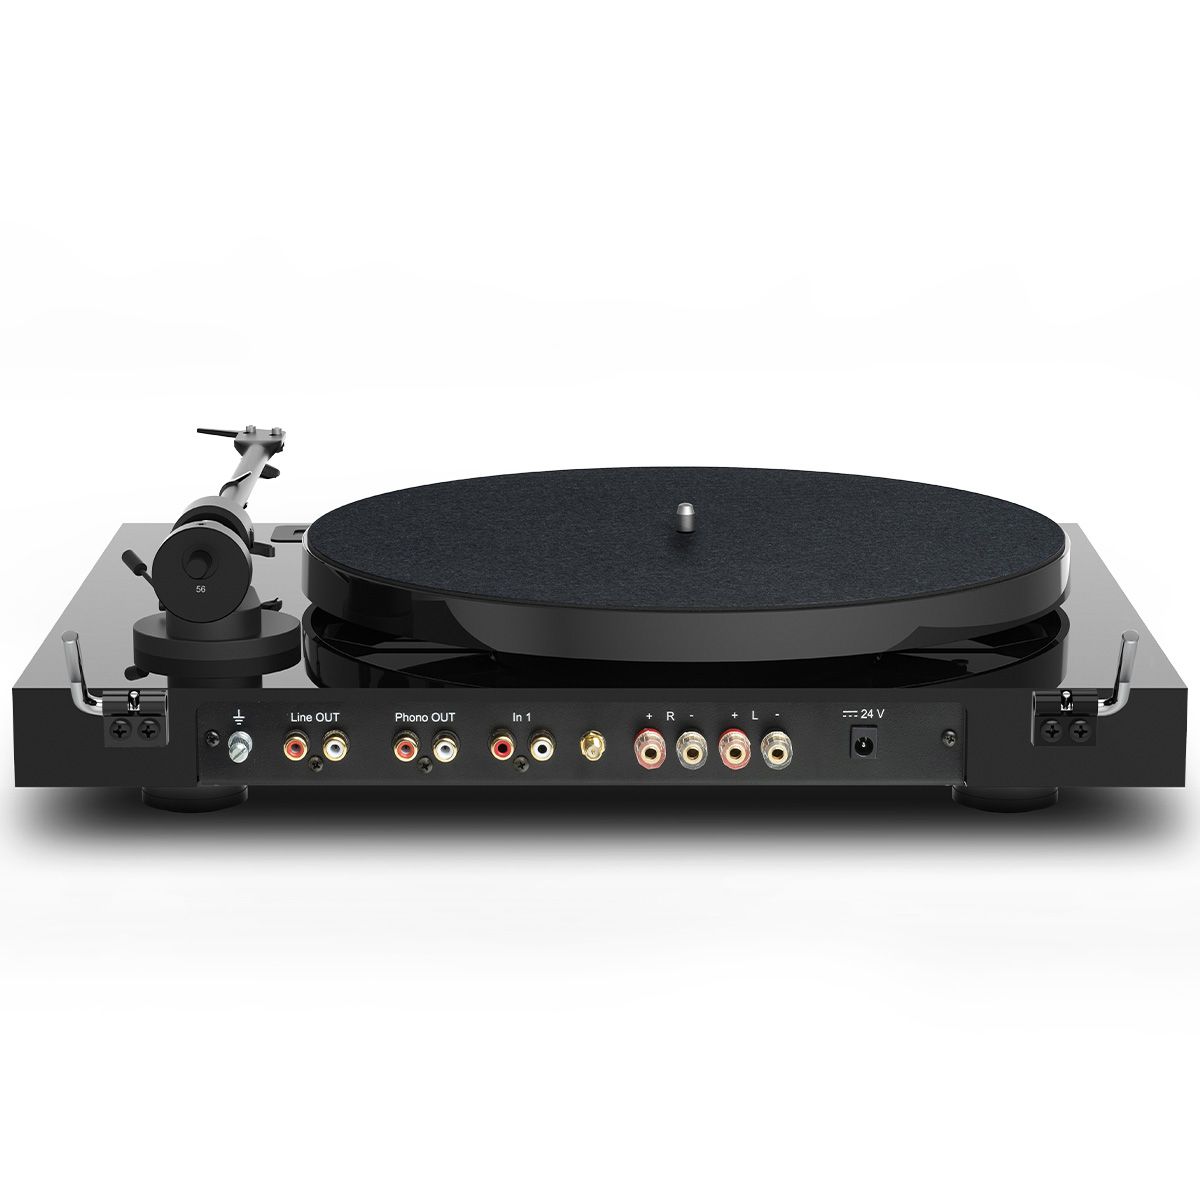 Pro-Ject Juke Box E1 Turntable in black showing rear inputs & outputs